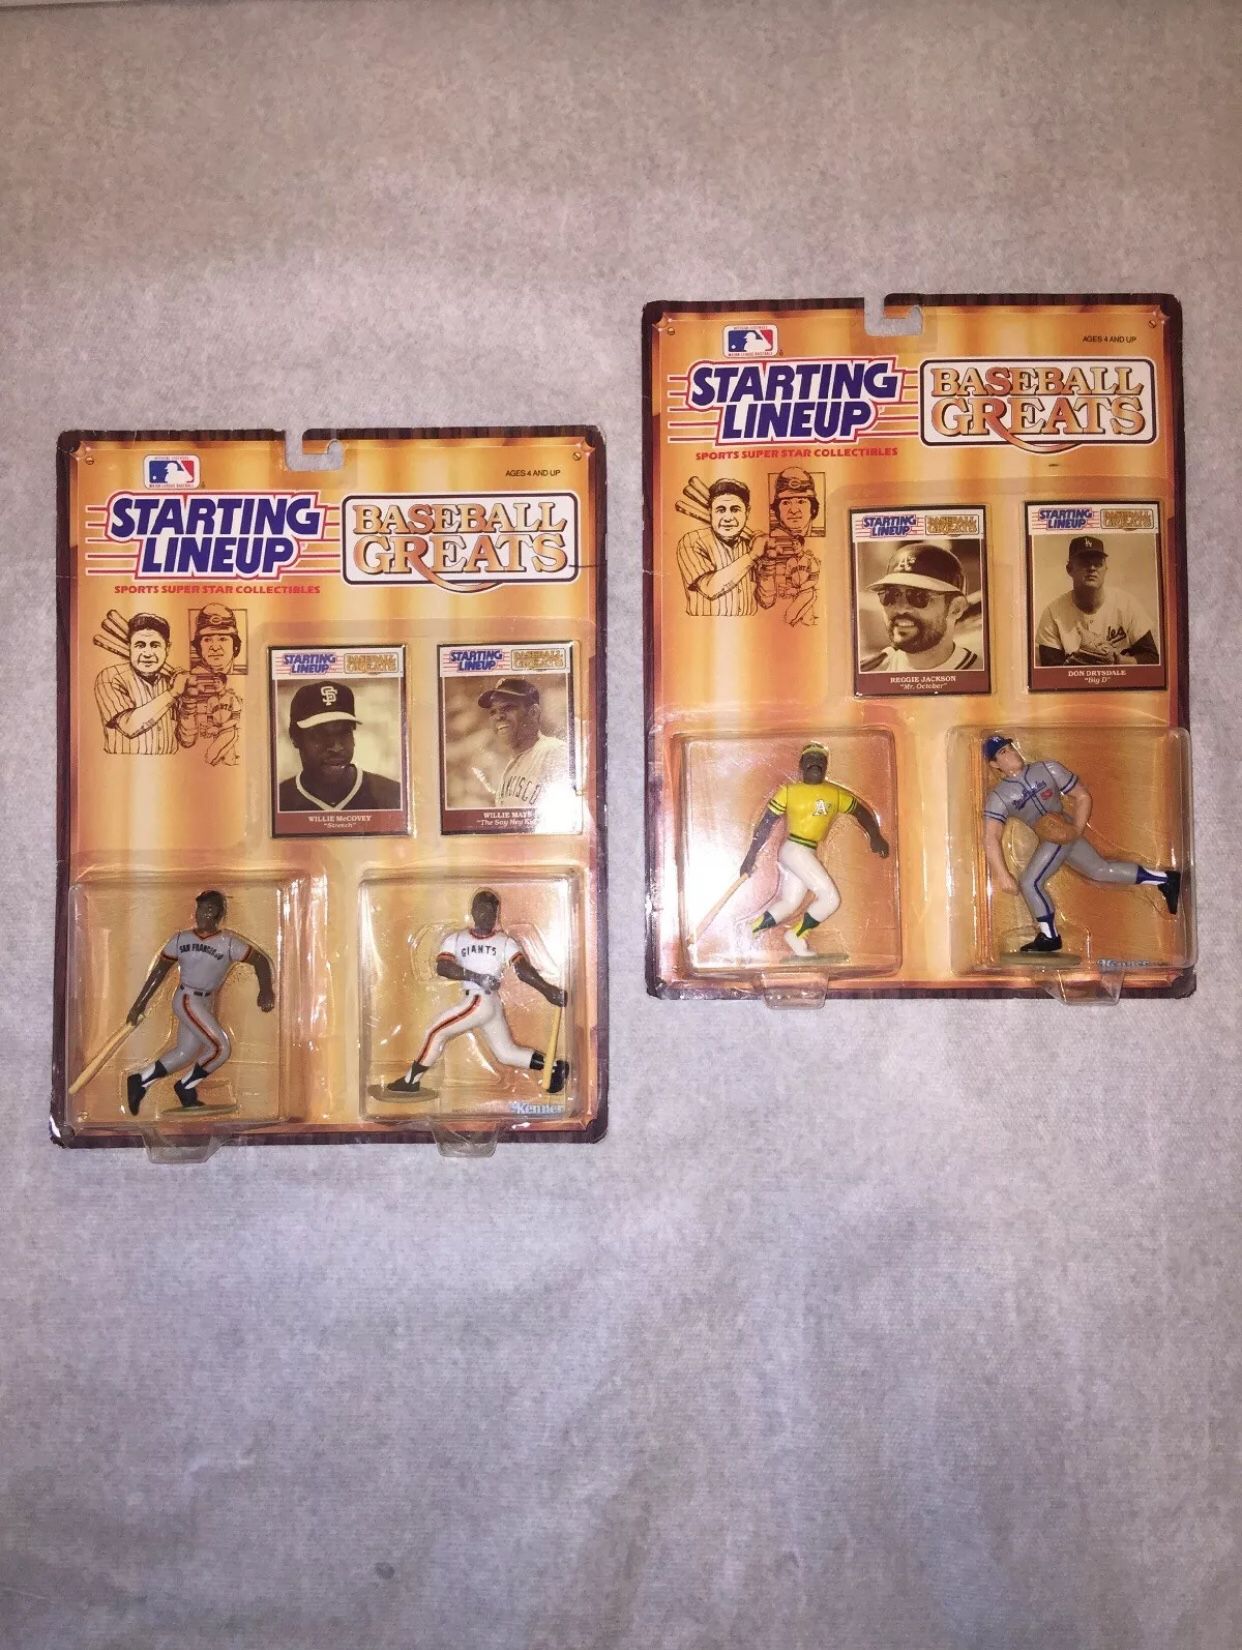 MLB New Action Figures Lot 2 Starting Lineup Toys Baseball Greats Rare Collectibles